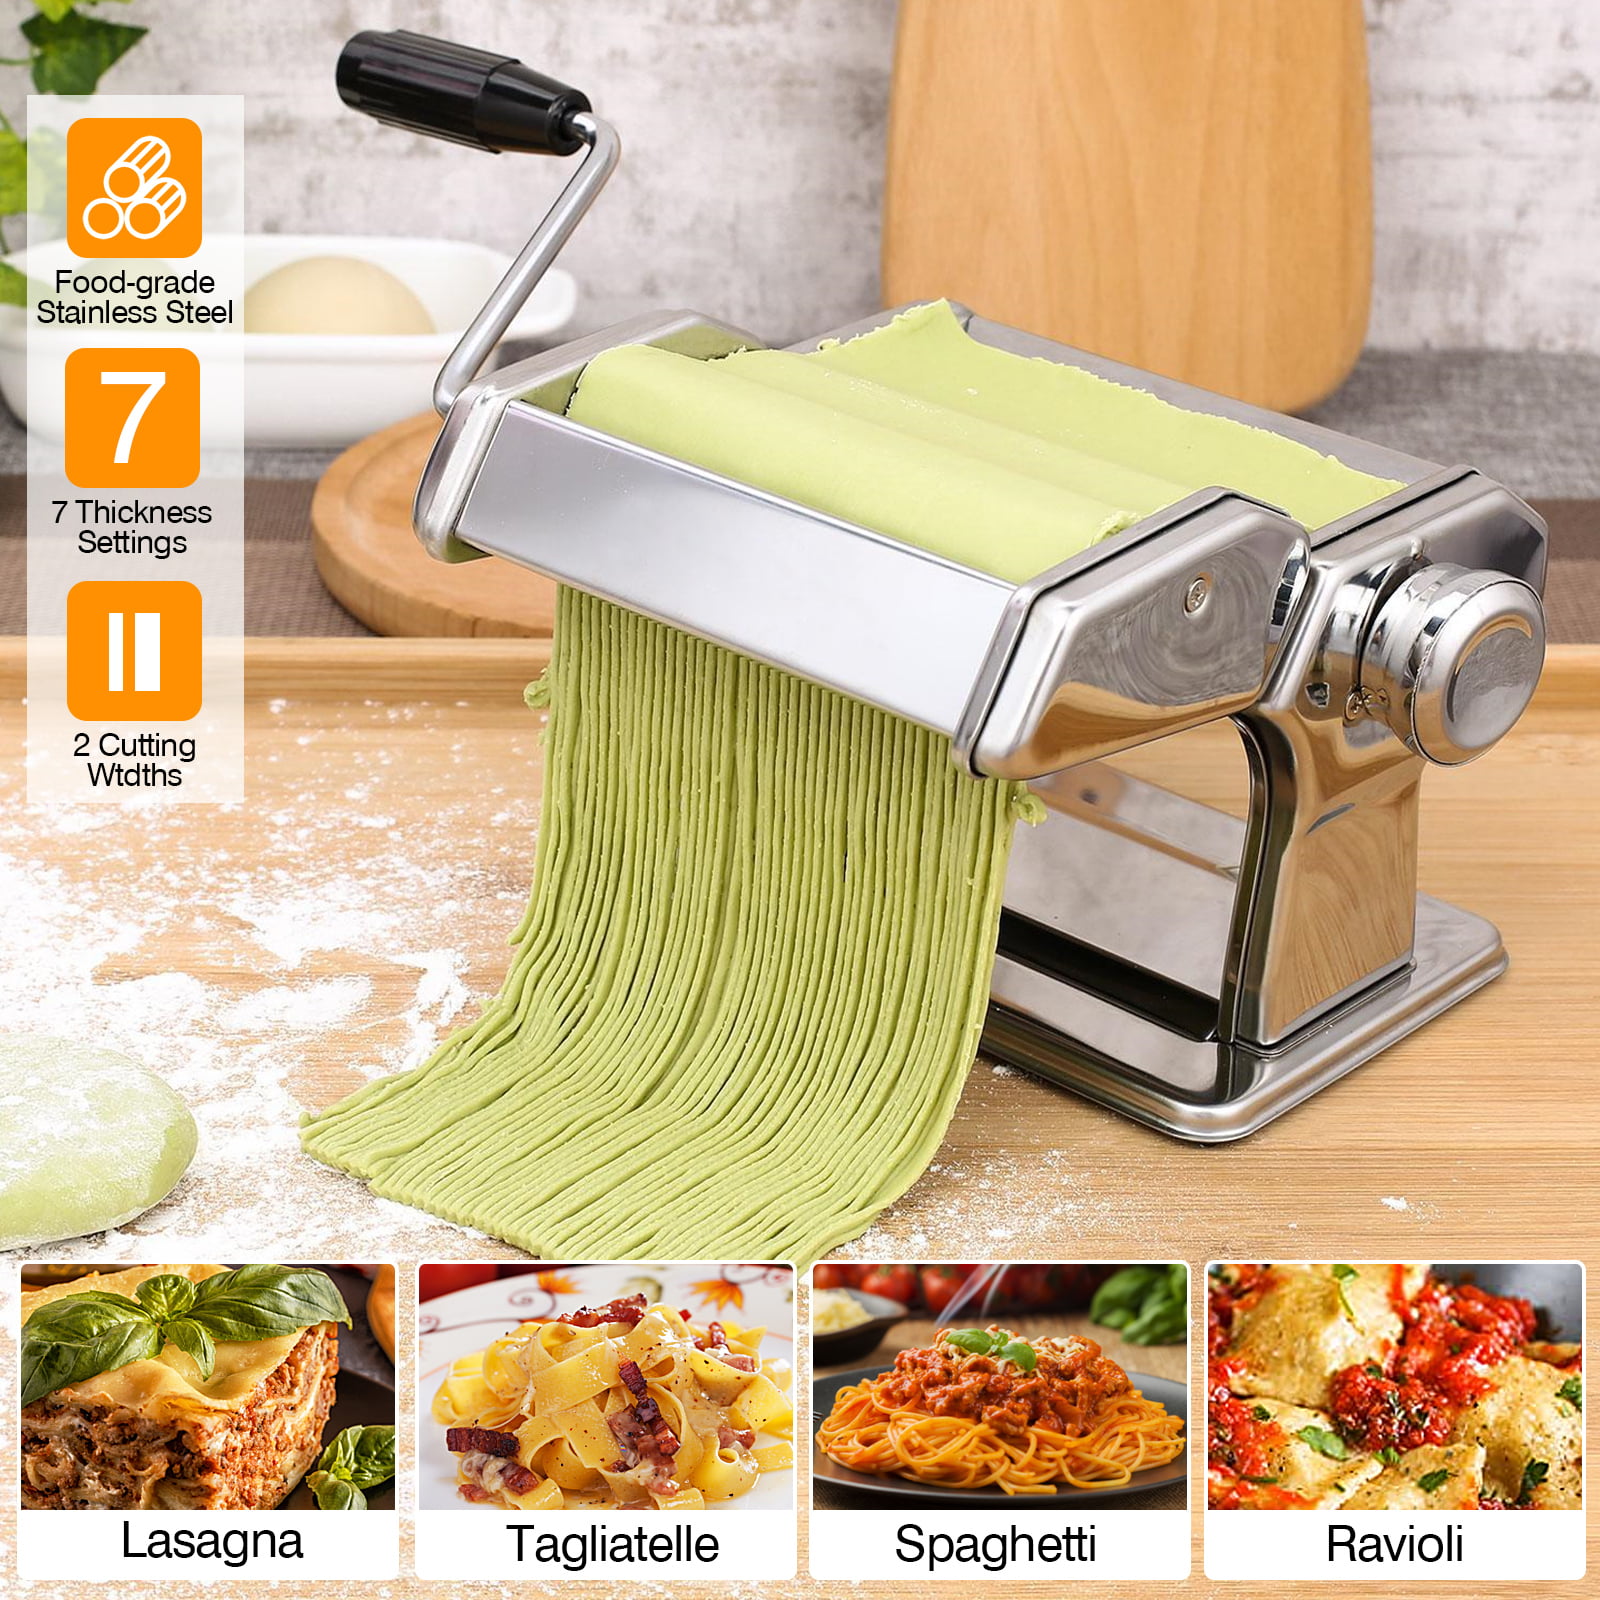 Ravioli and Spaghetti Preoin Homemade Pasta Maker Lasagna Manual Pasta Machine with 8 Adjustable Thickness Settings Dough Roller for Fresh Fettuccine 